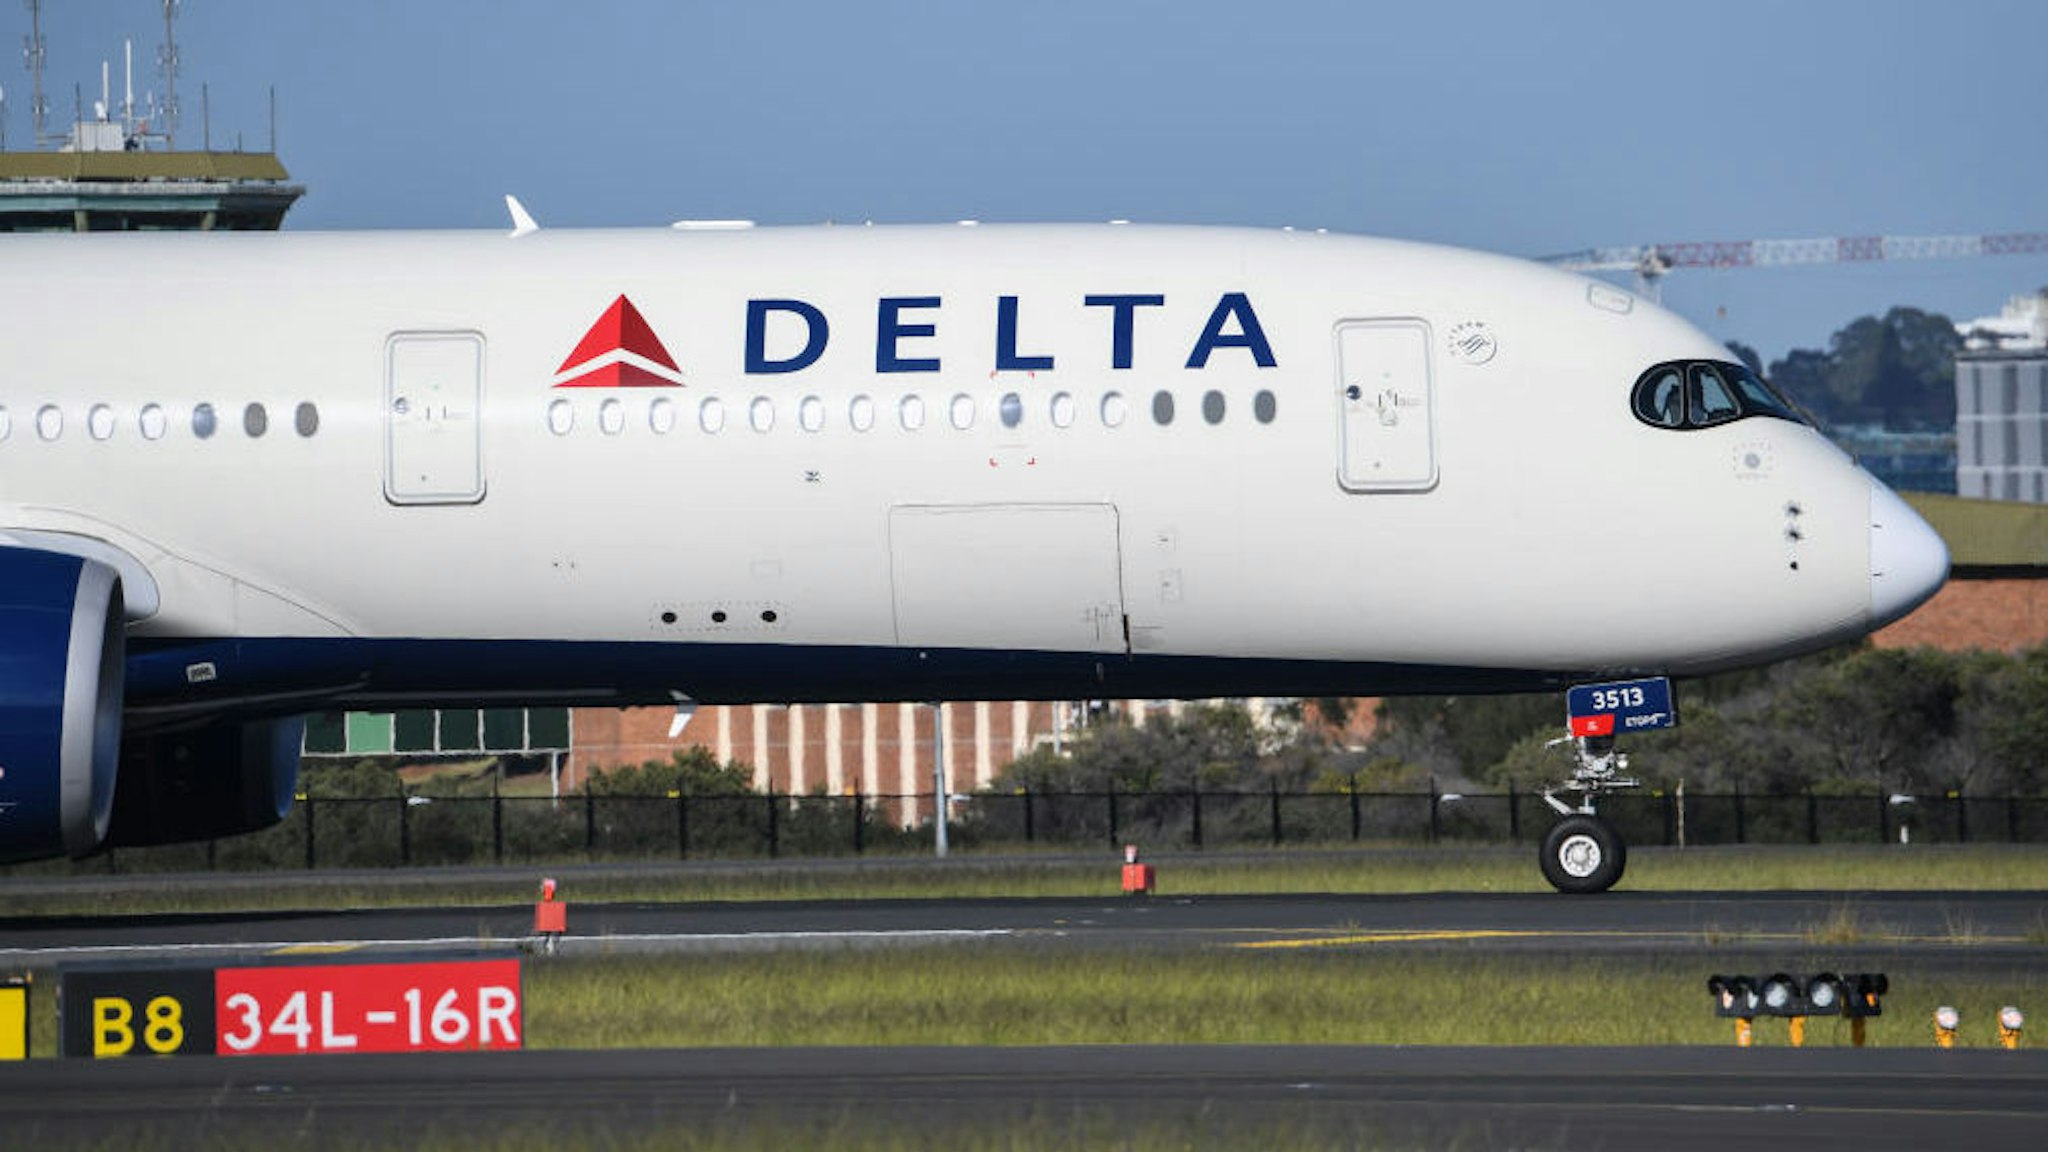 A Delta airlines aircraft landing from Los Angeles at Kingsford Smith International airport on October 31, 2021 in Sydney, Australia.